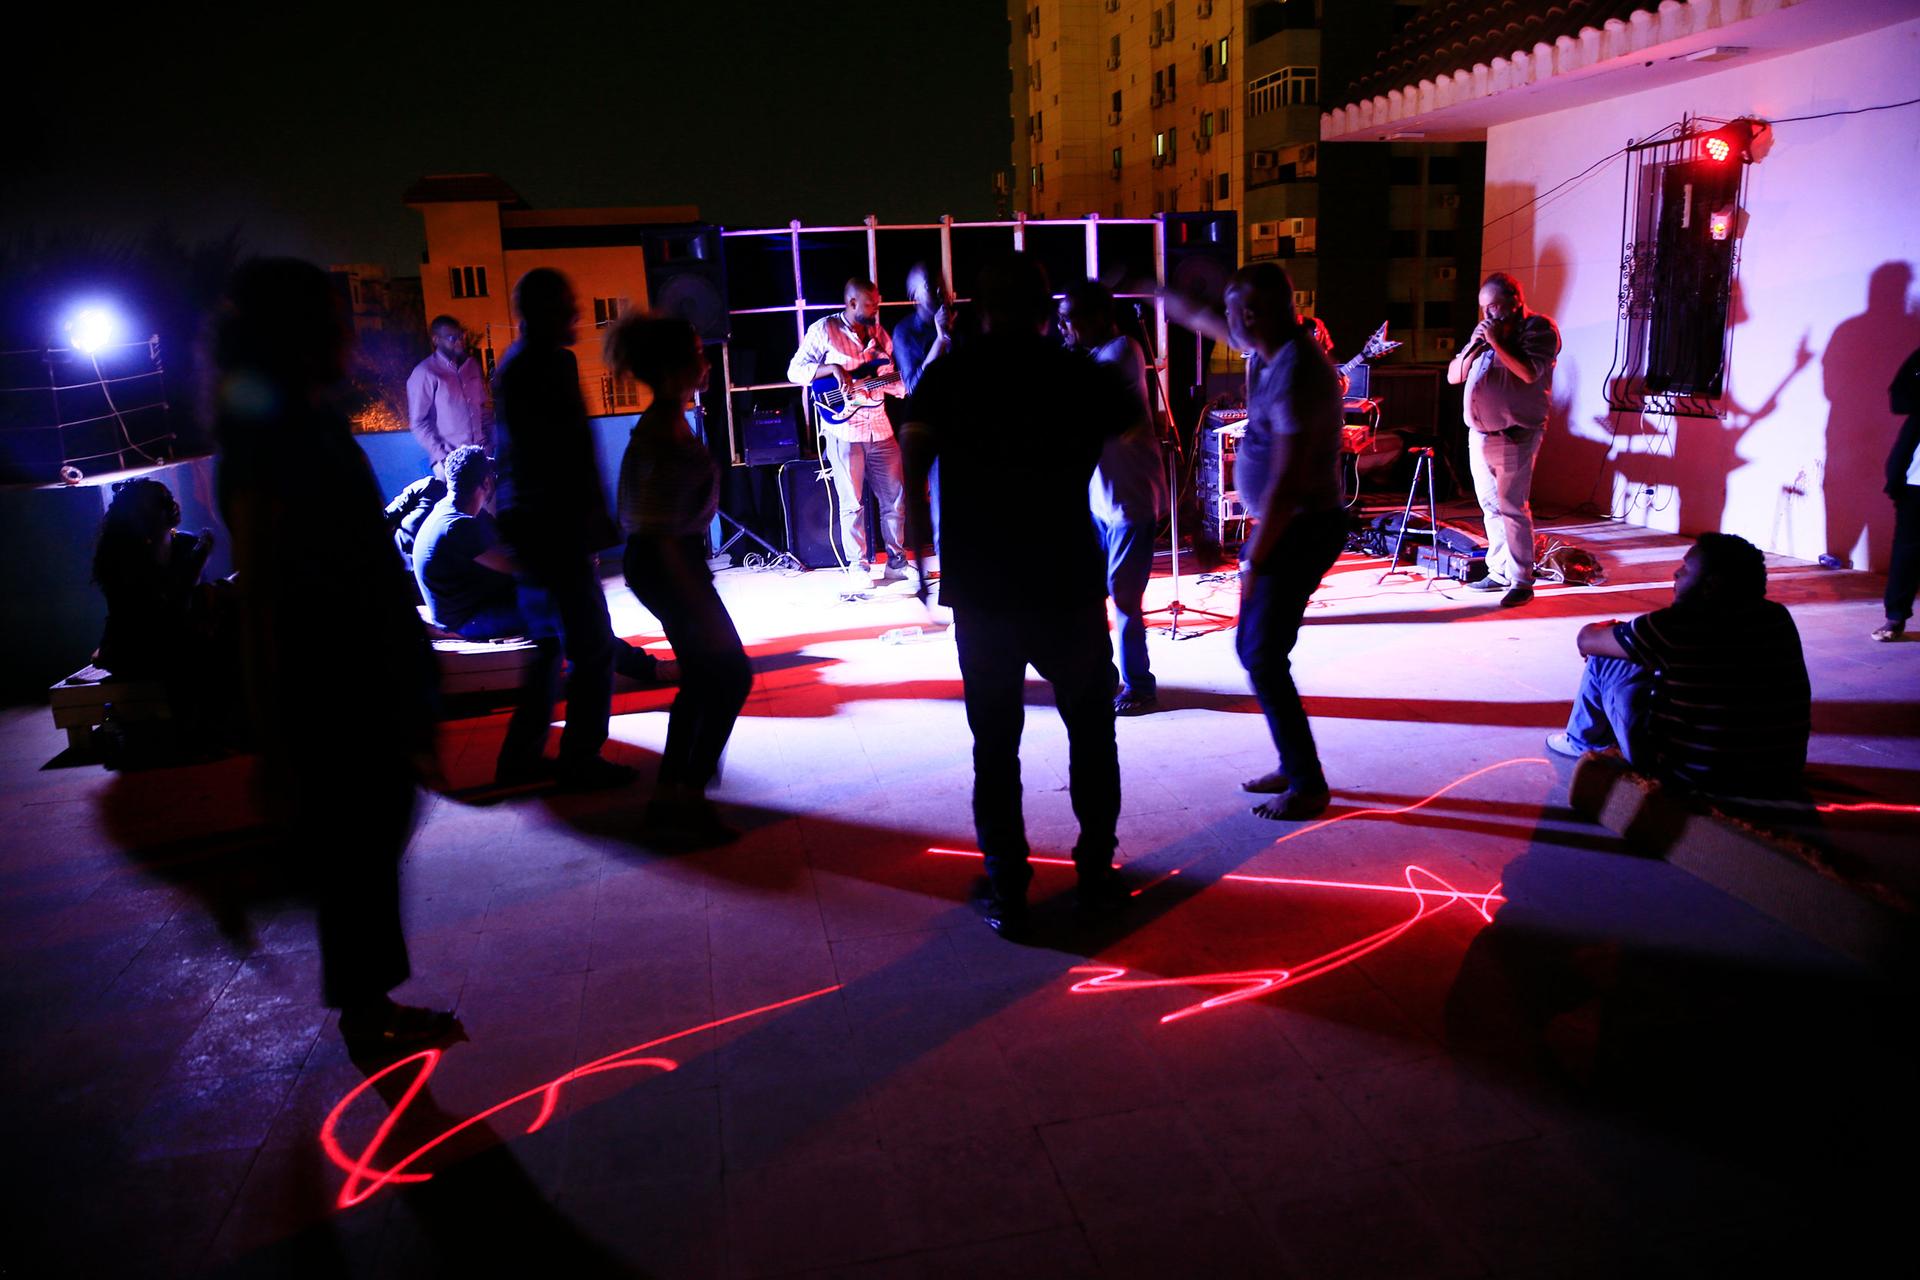 A crowd of people are shown in purple and red lighting, dancing with a band playing in the distance.